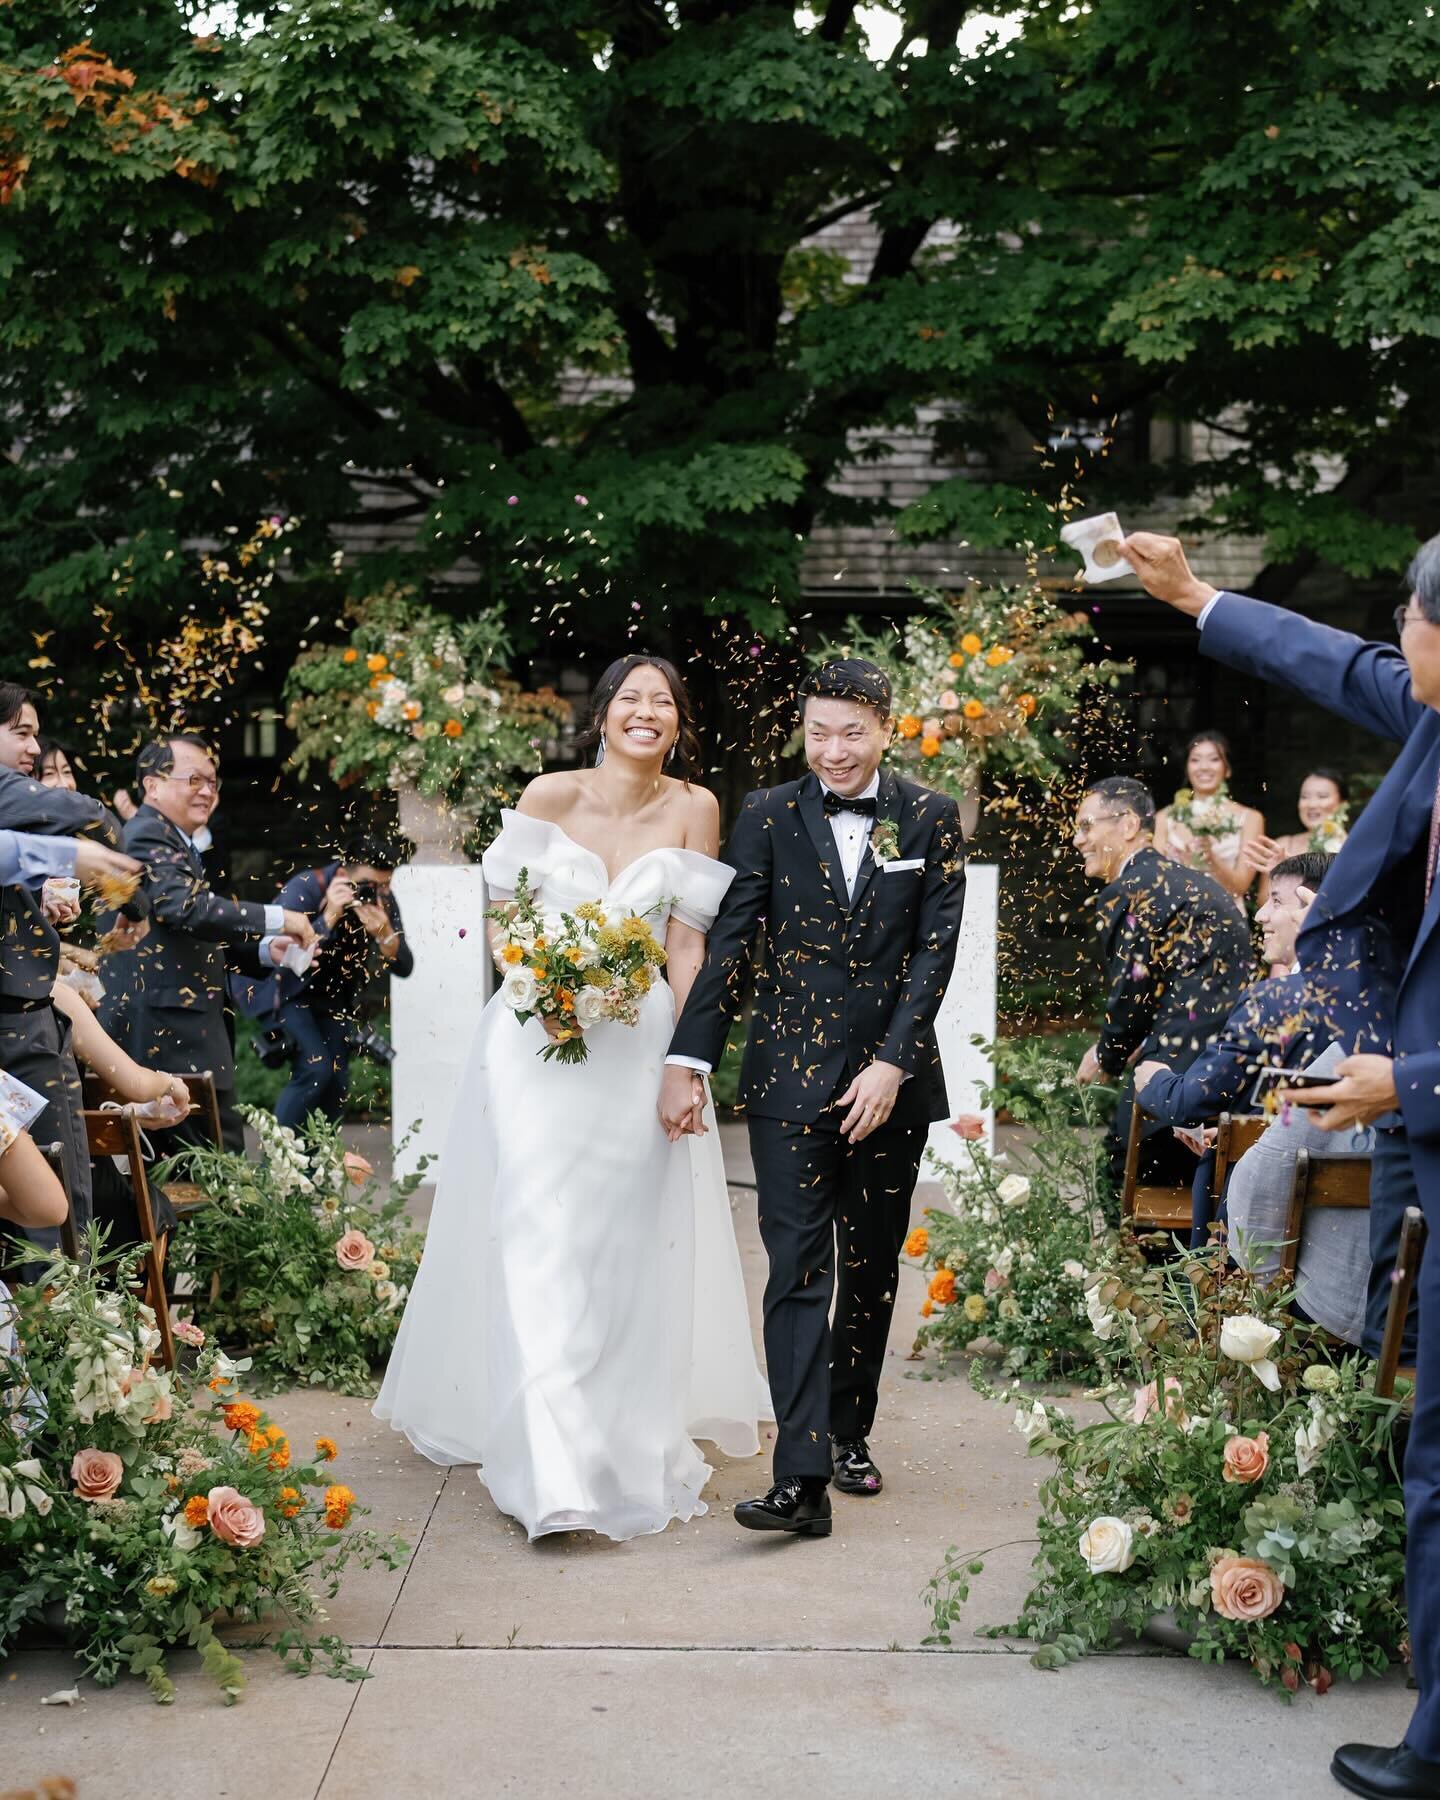 ABSOLUTELY OBSESSED!  Made my week! 🧡

Planning: @pinkbowtienyc 
Photography: @elenawolfe 
Venue: @bluehillfarm